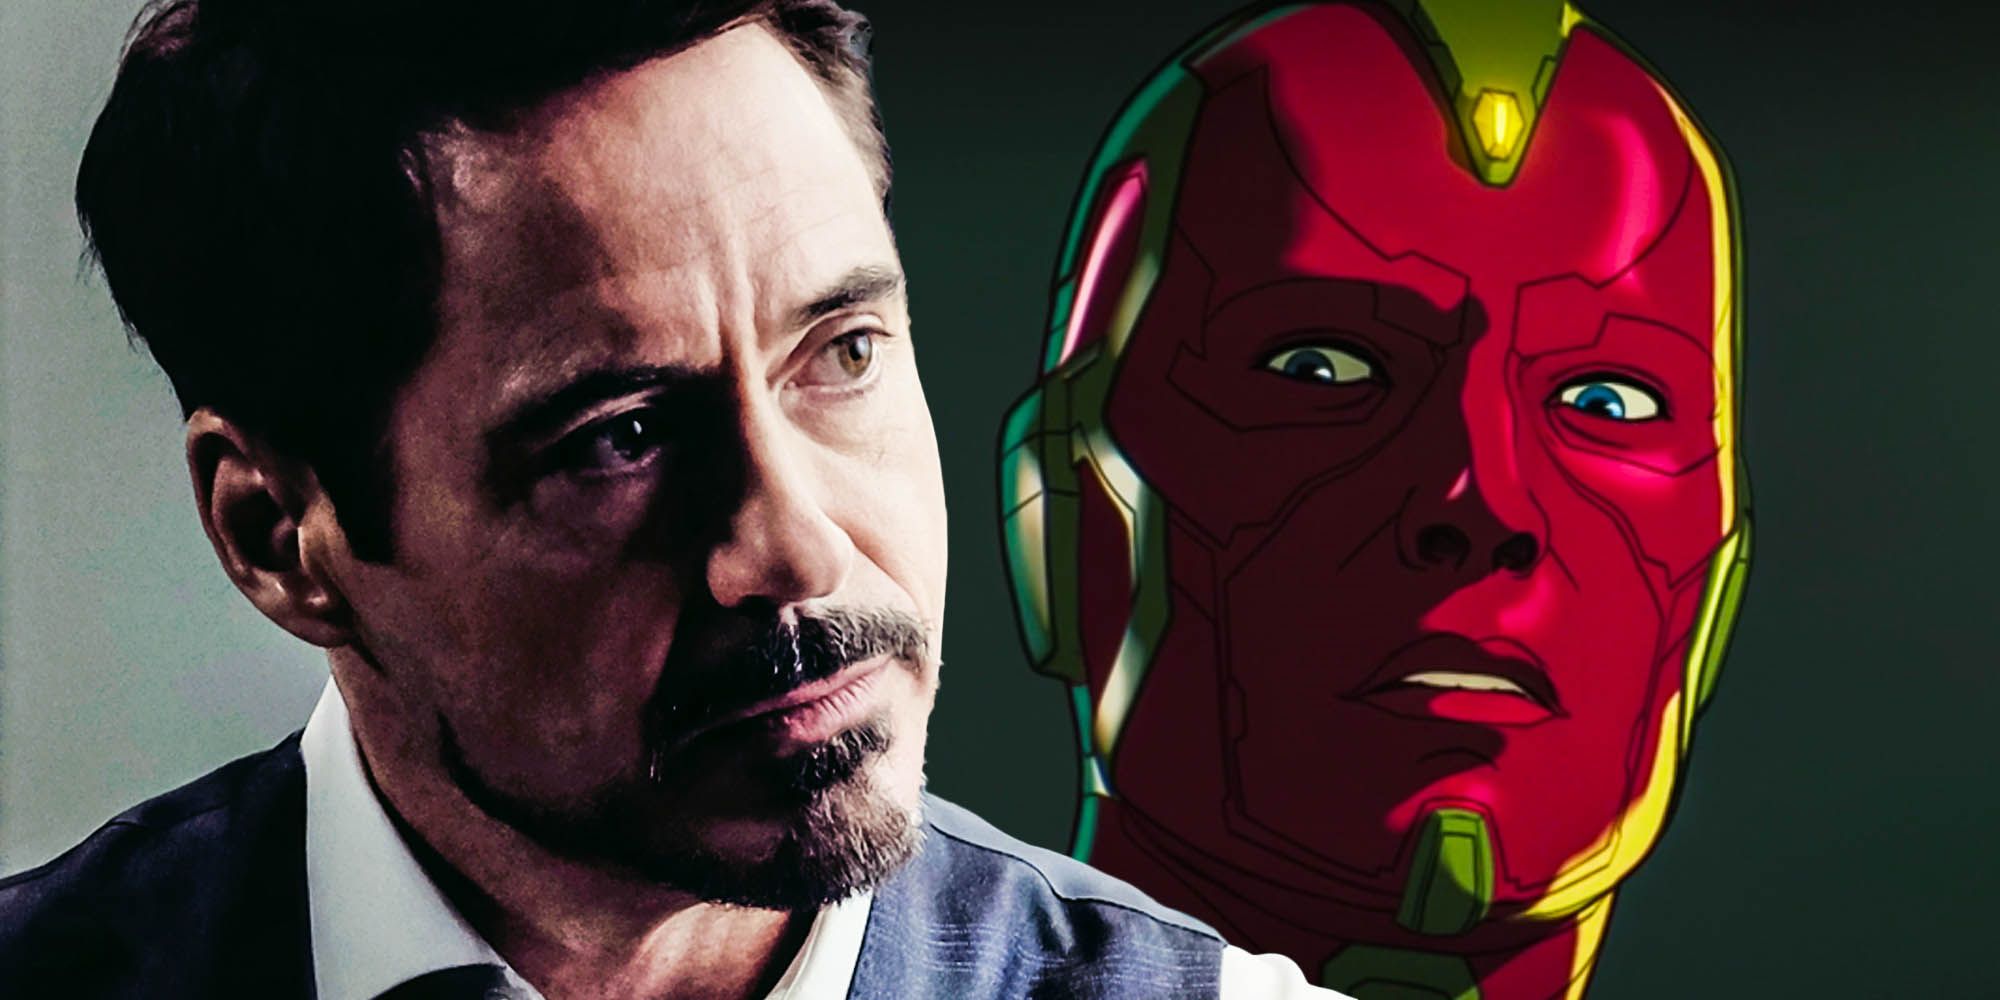 What if zombies made vision more like Tony stark